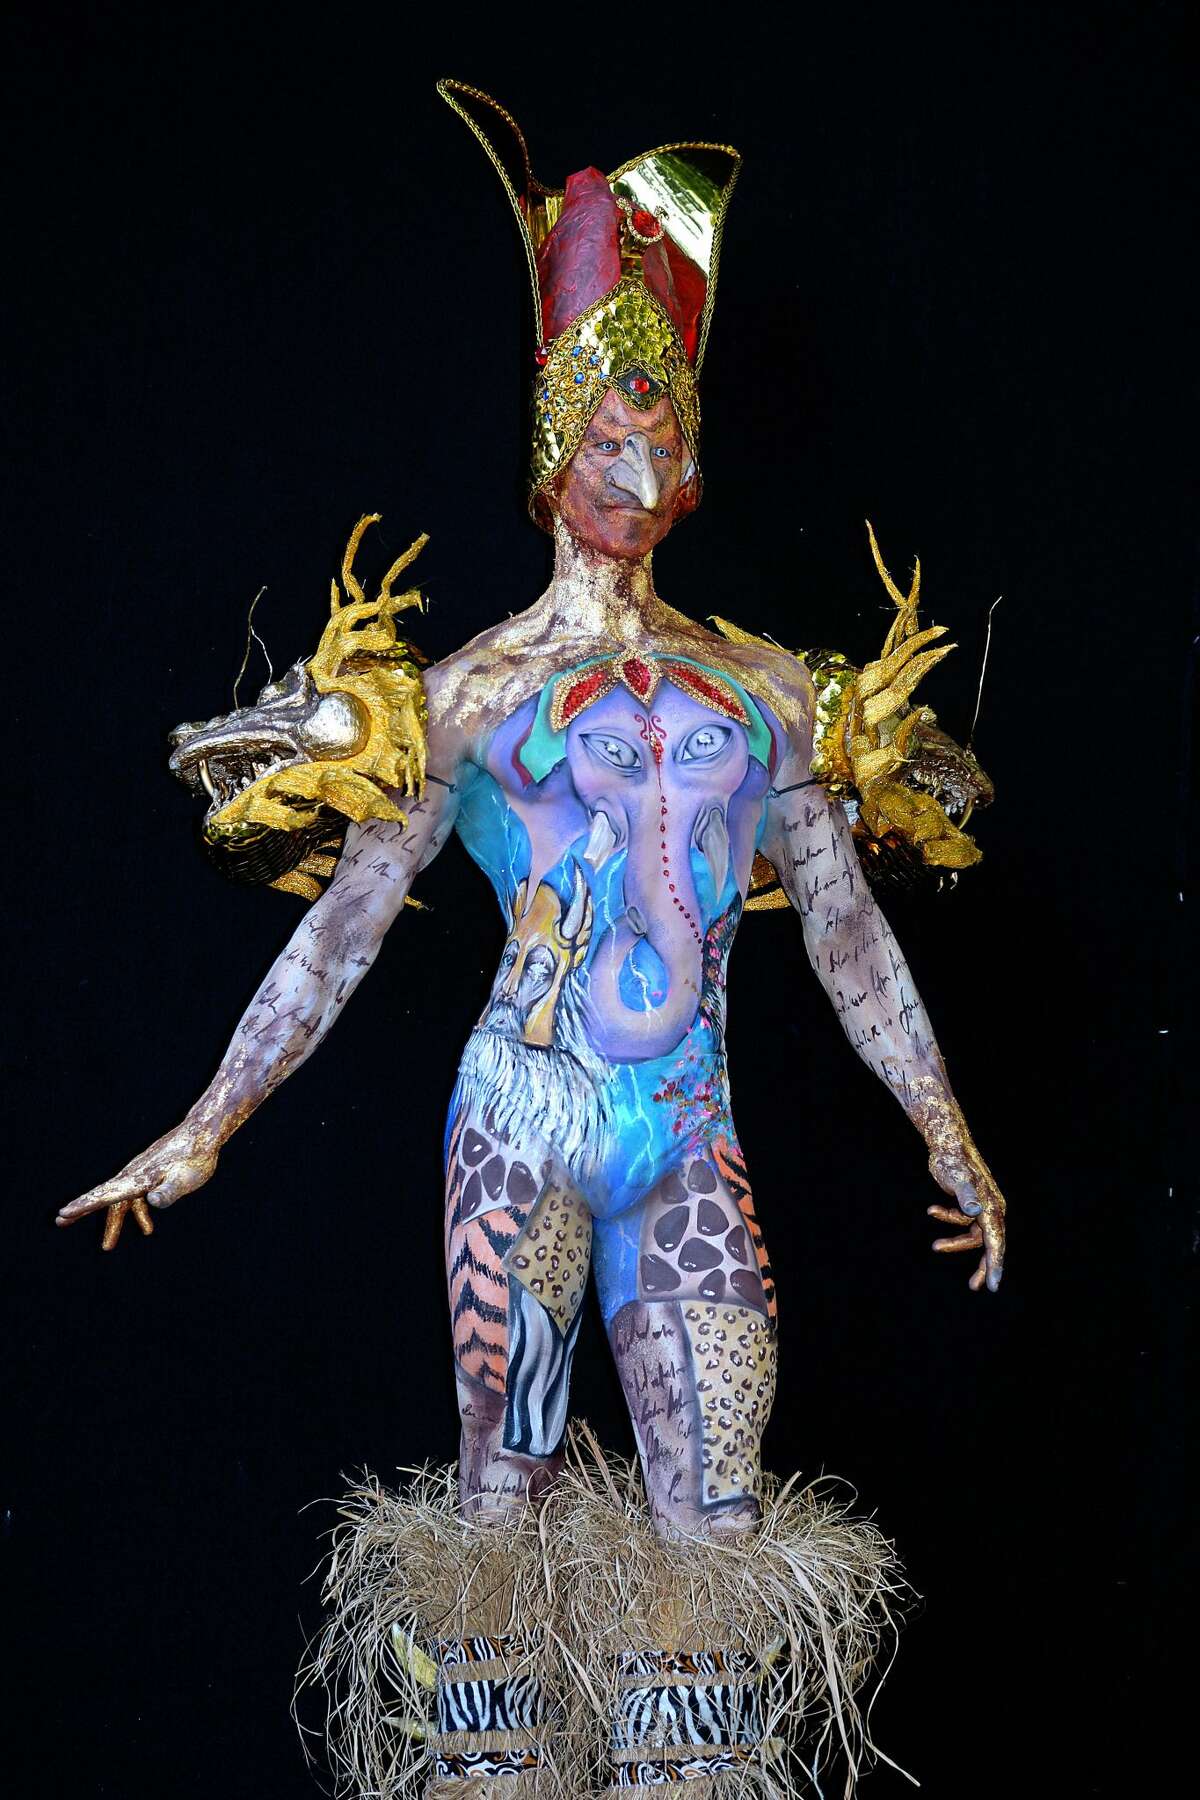 PHOTOS World Bodypainting Festival gets creative, naked in Austria